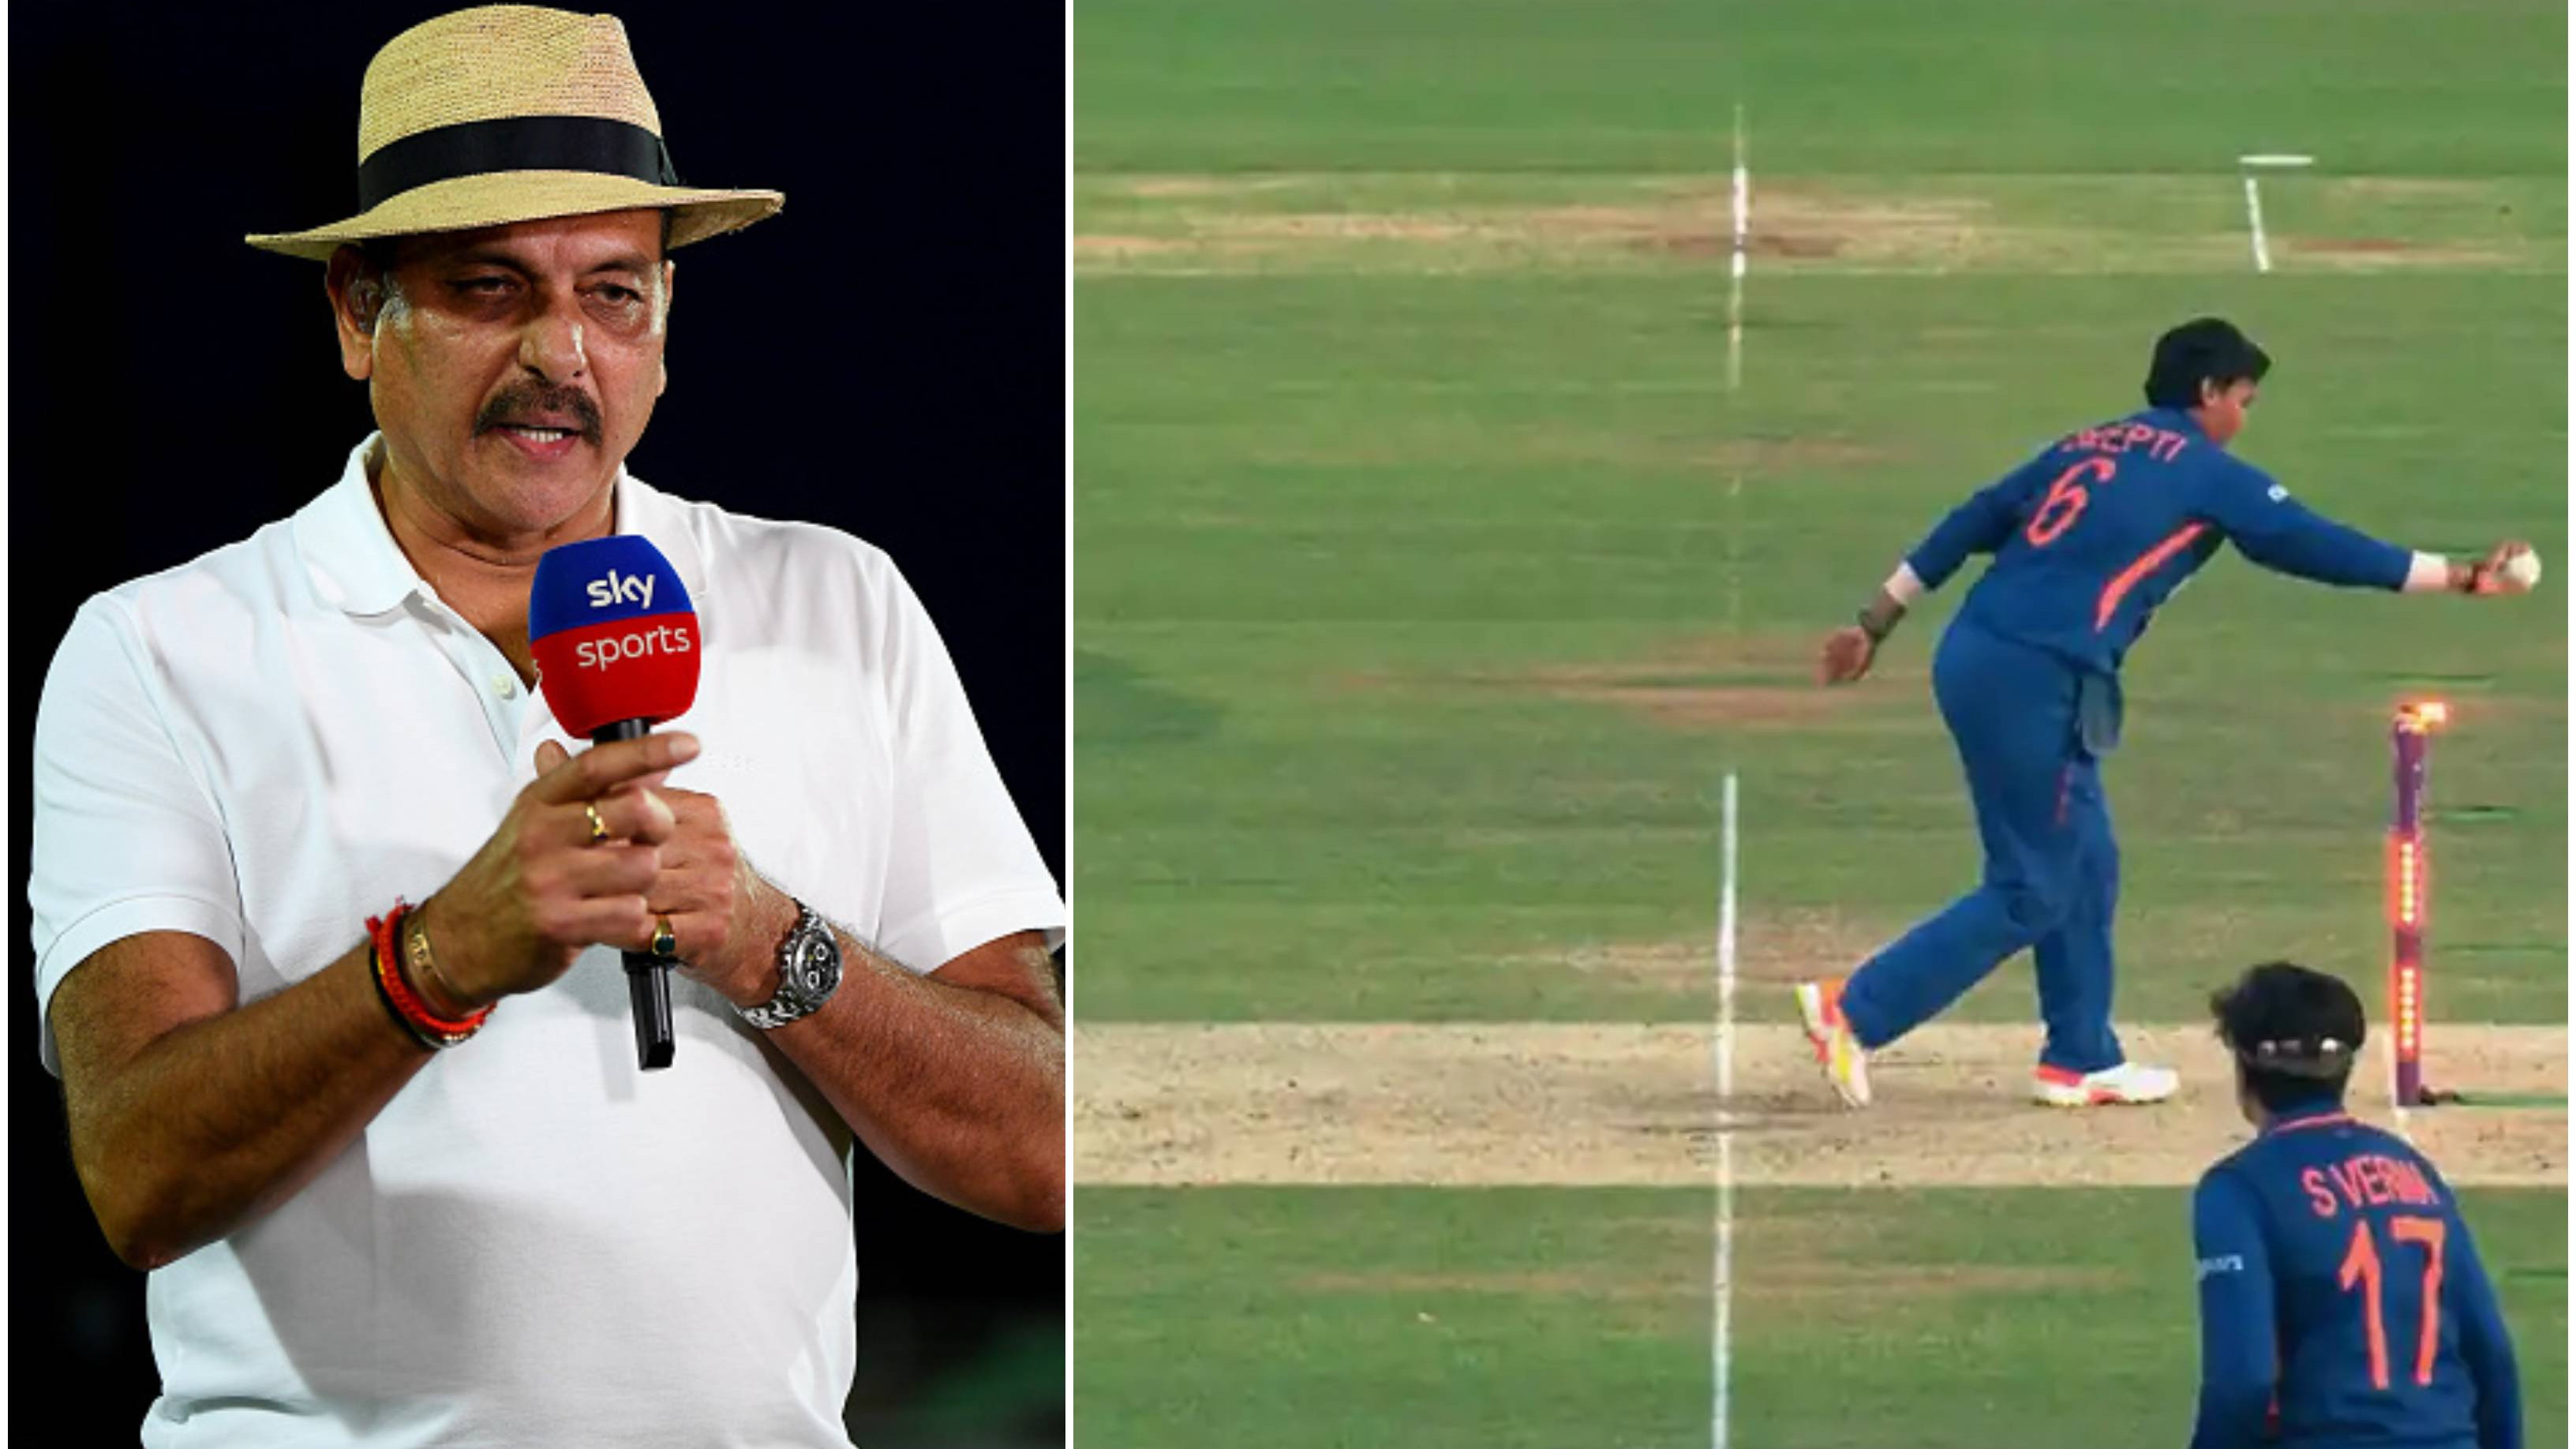 “It is cheating…”: Ravi Shastri’s hard-hitting take on run-out at non-striker's end